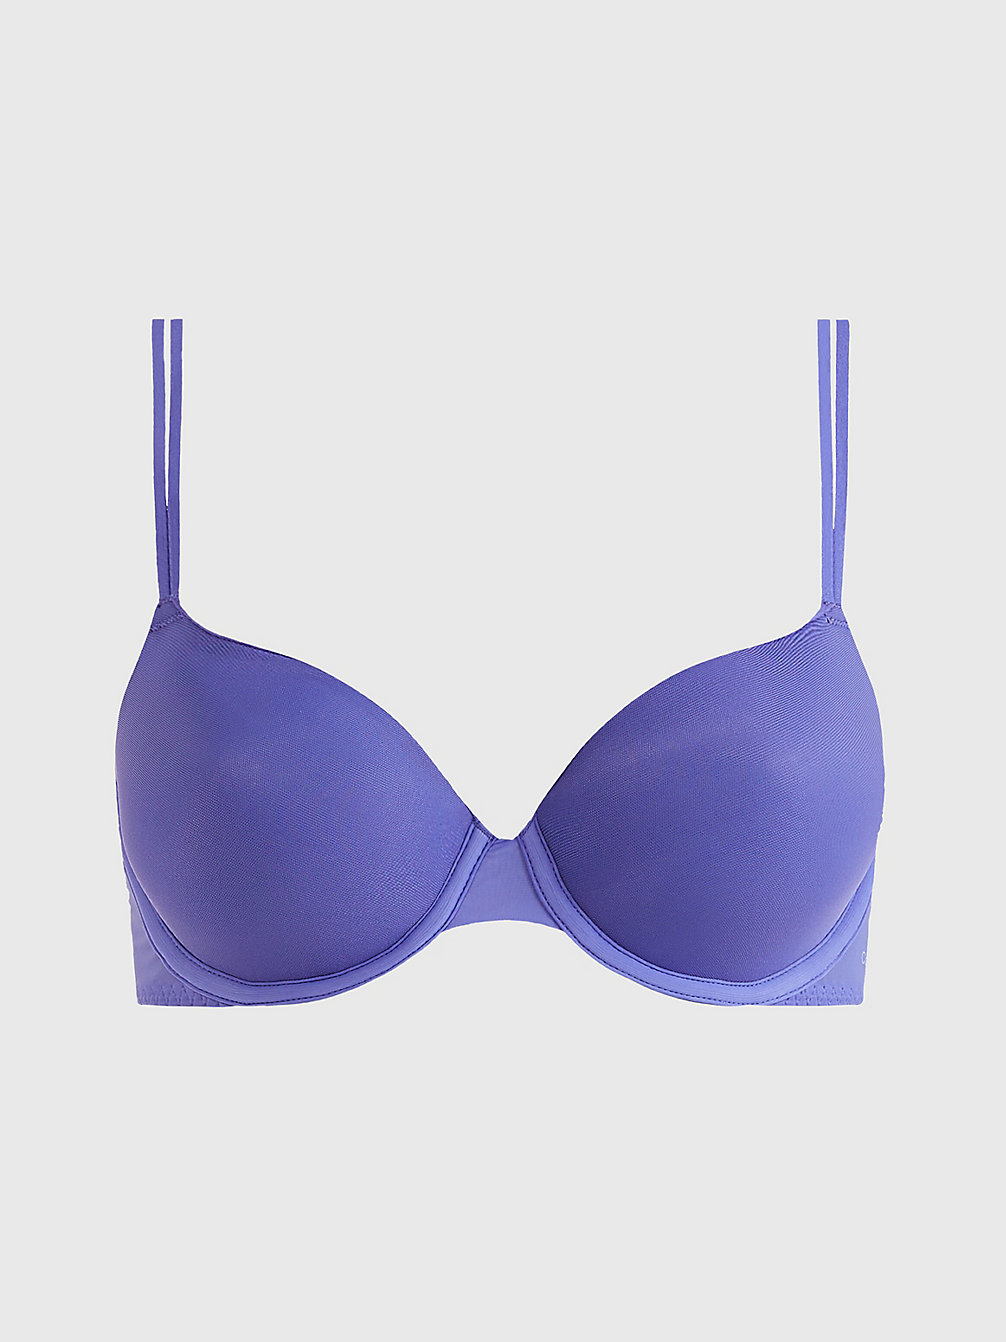 Sujetador Invisible - Sheer Marquisette > BLUE IRIS > undefined mujer > Calvin Klein